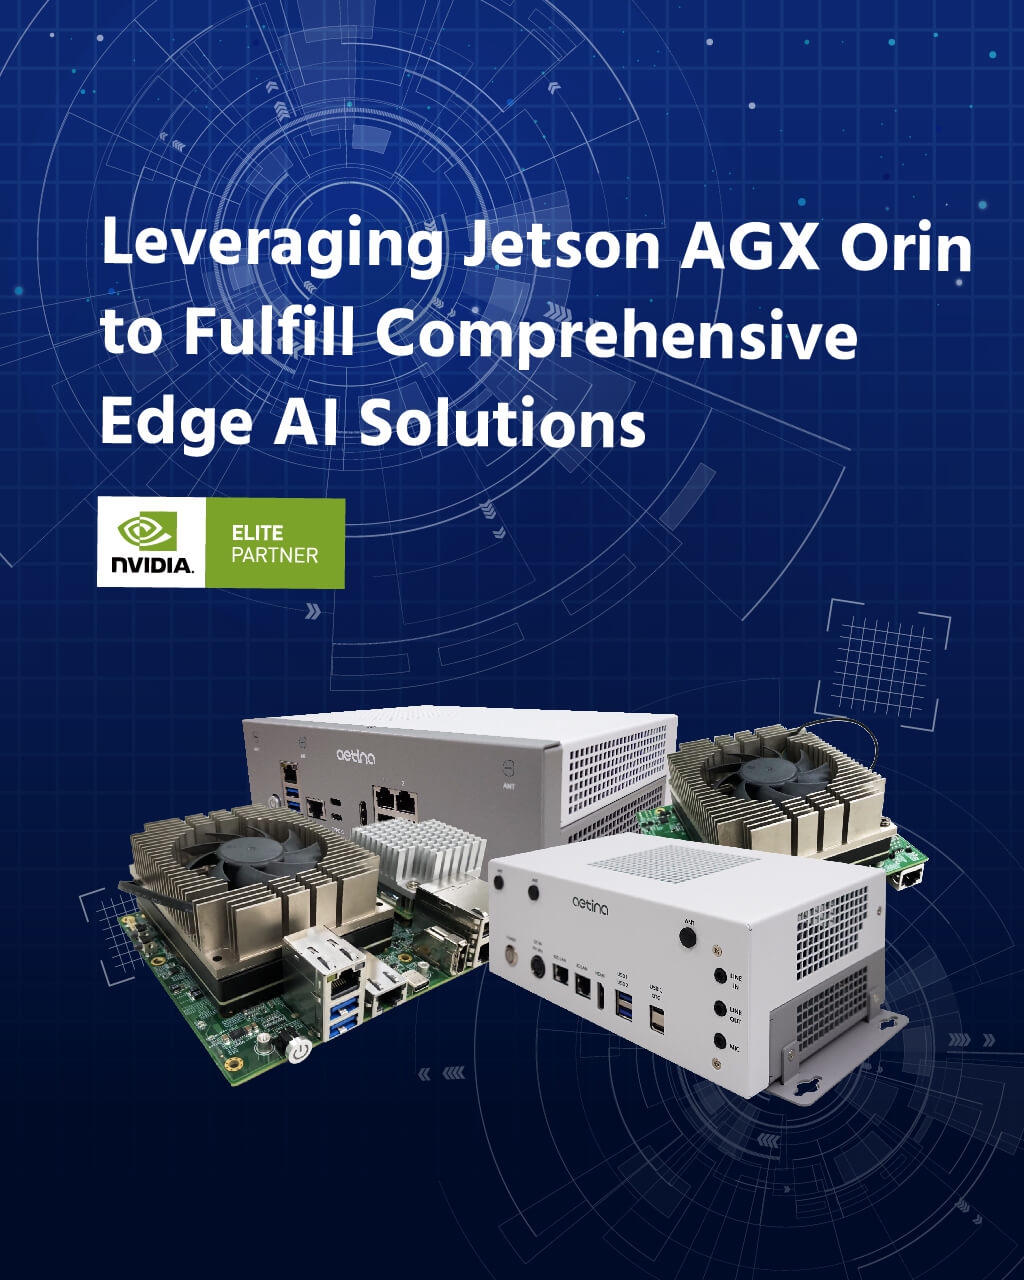 Leveraging NVIDIA Jetson Series to Fulfill Comprehensive Edge AI Solutions